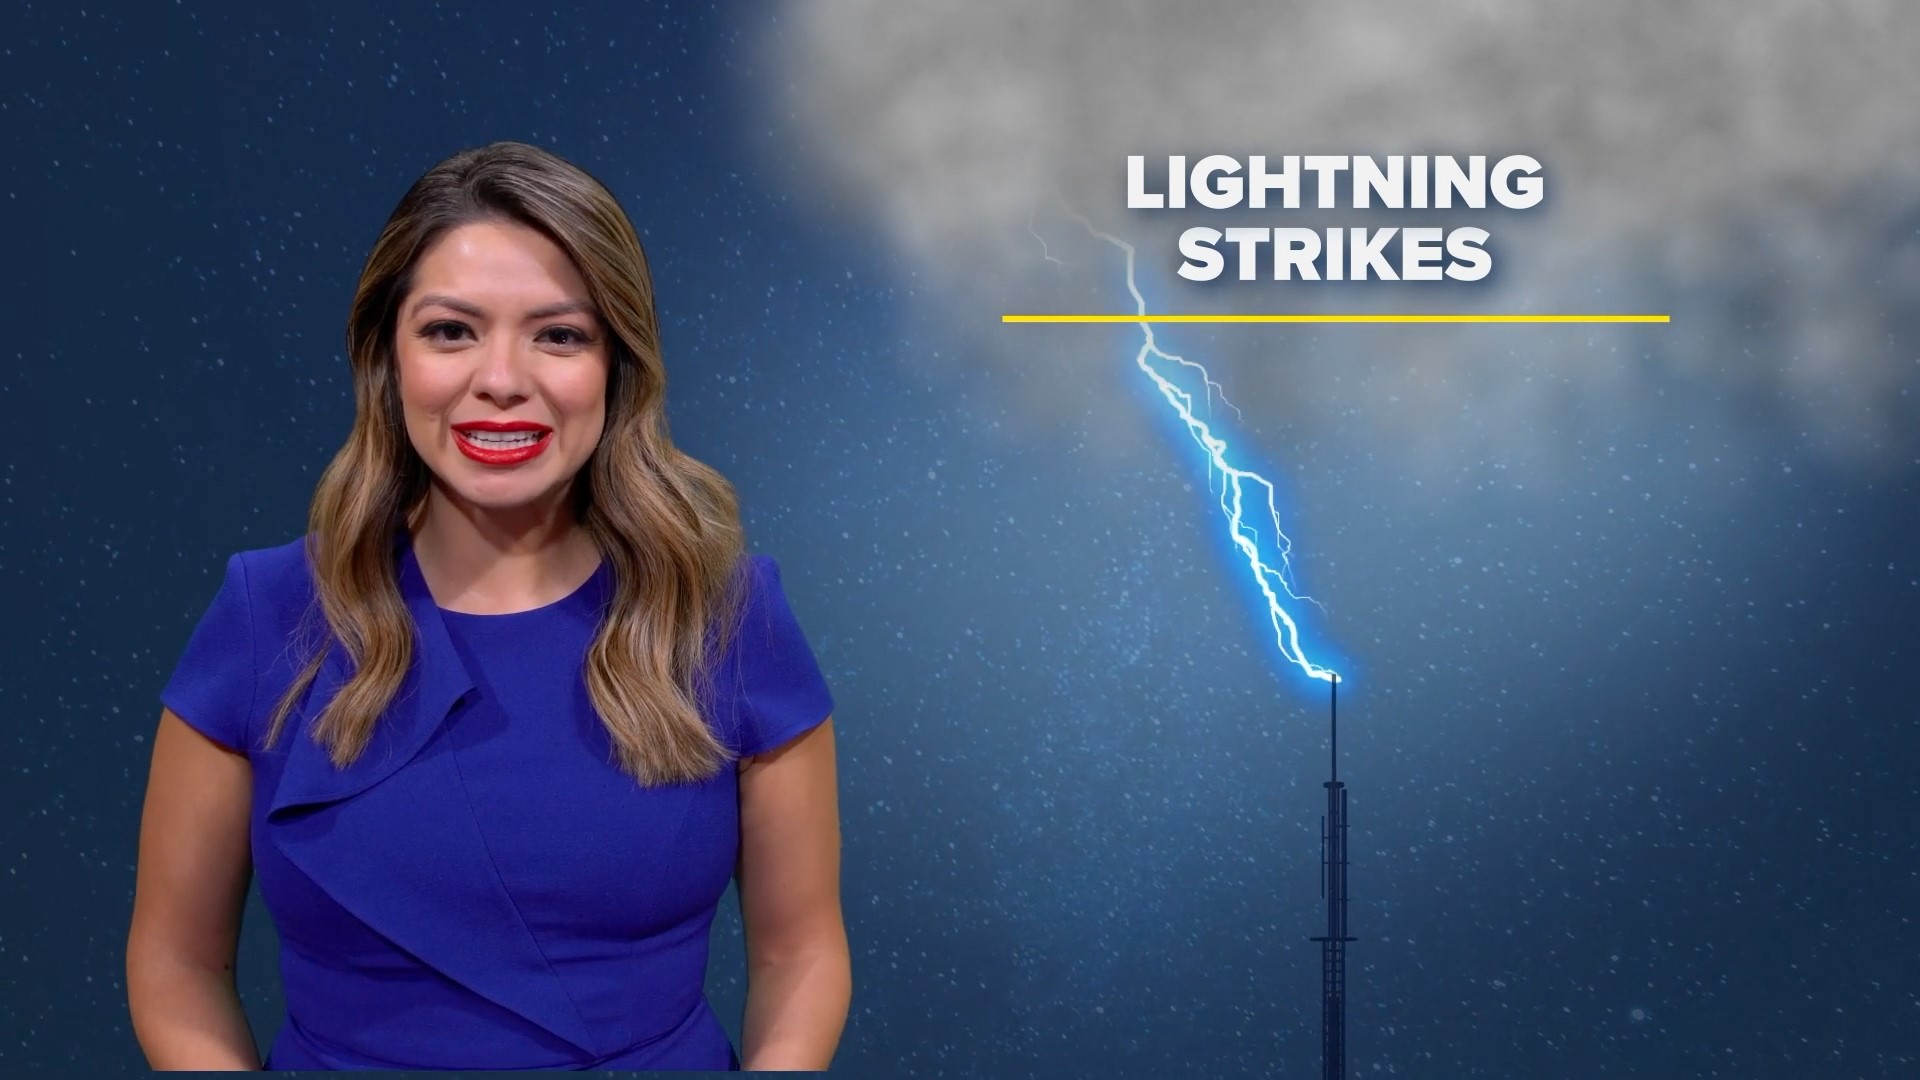 Can lightning strike twice in the same place?